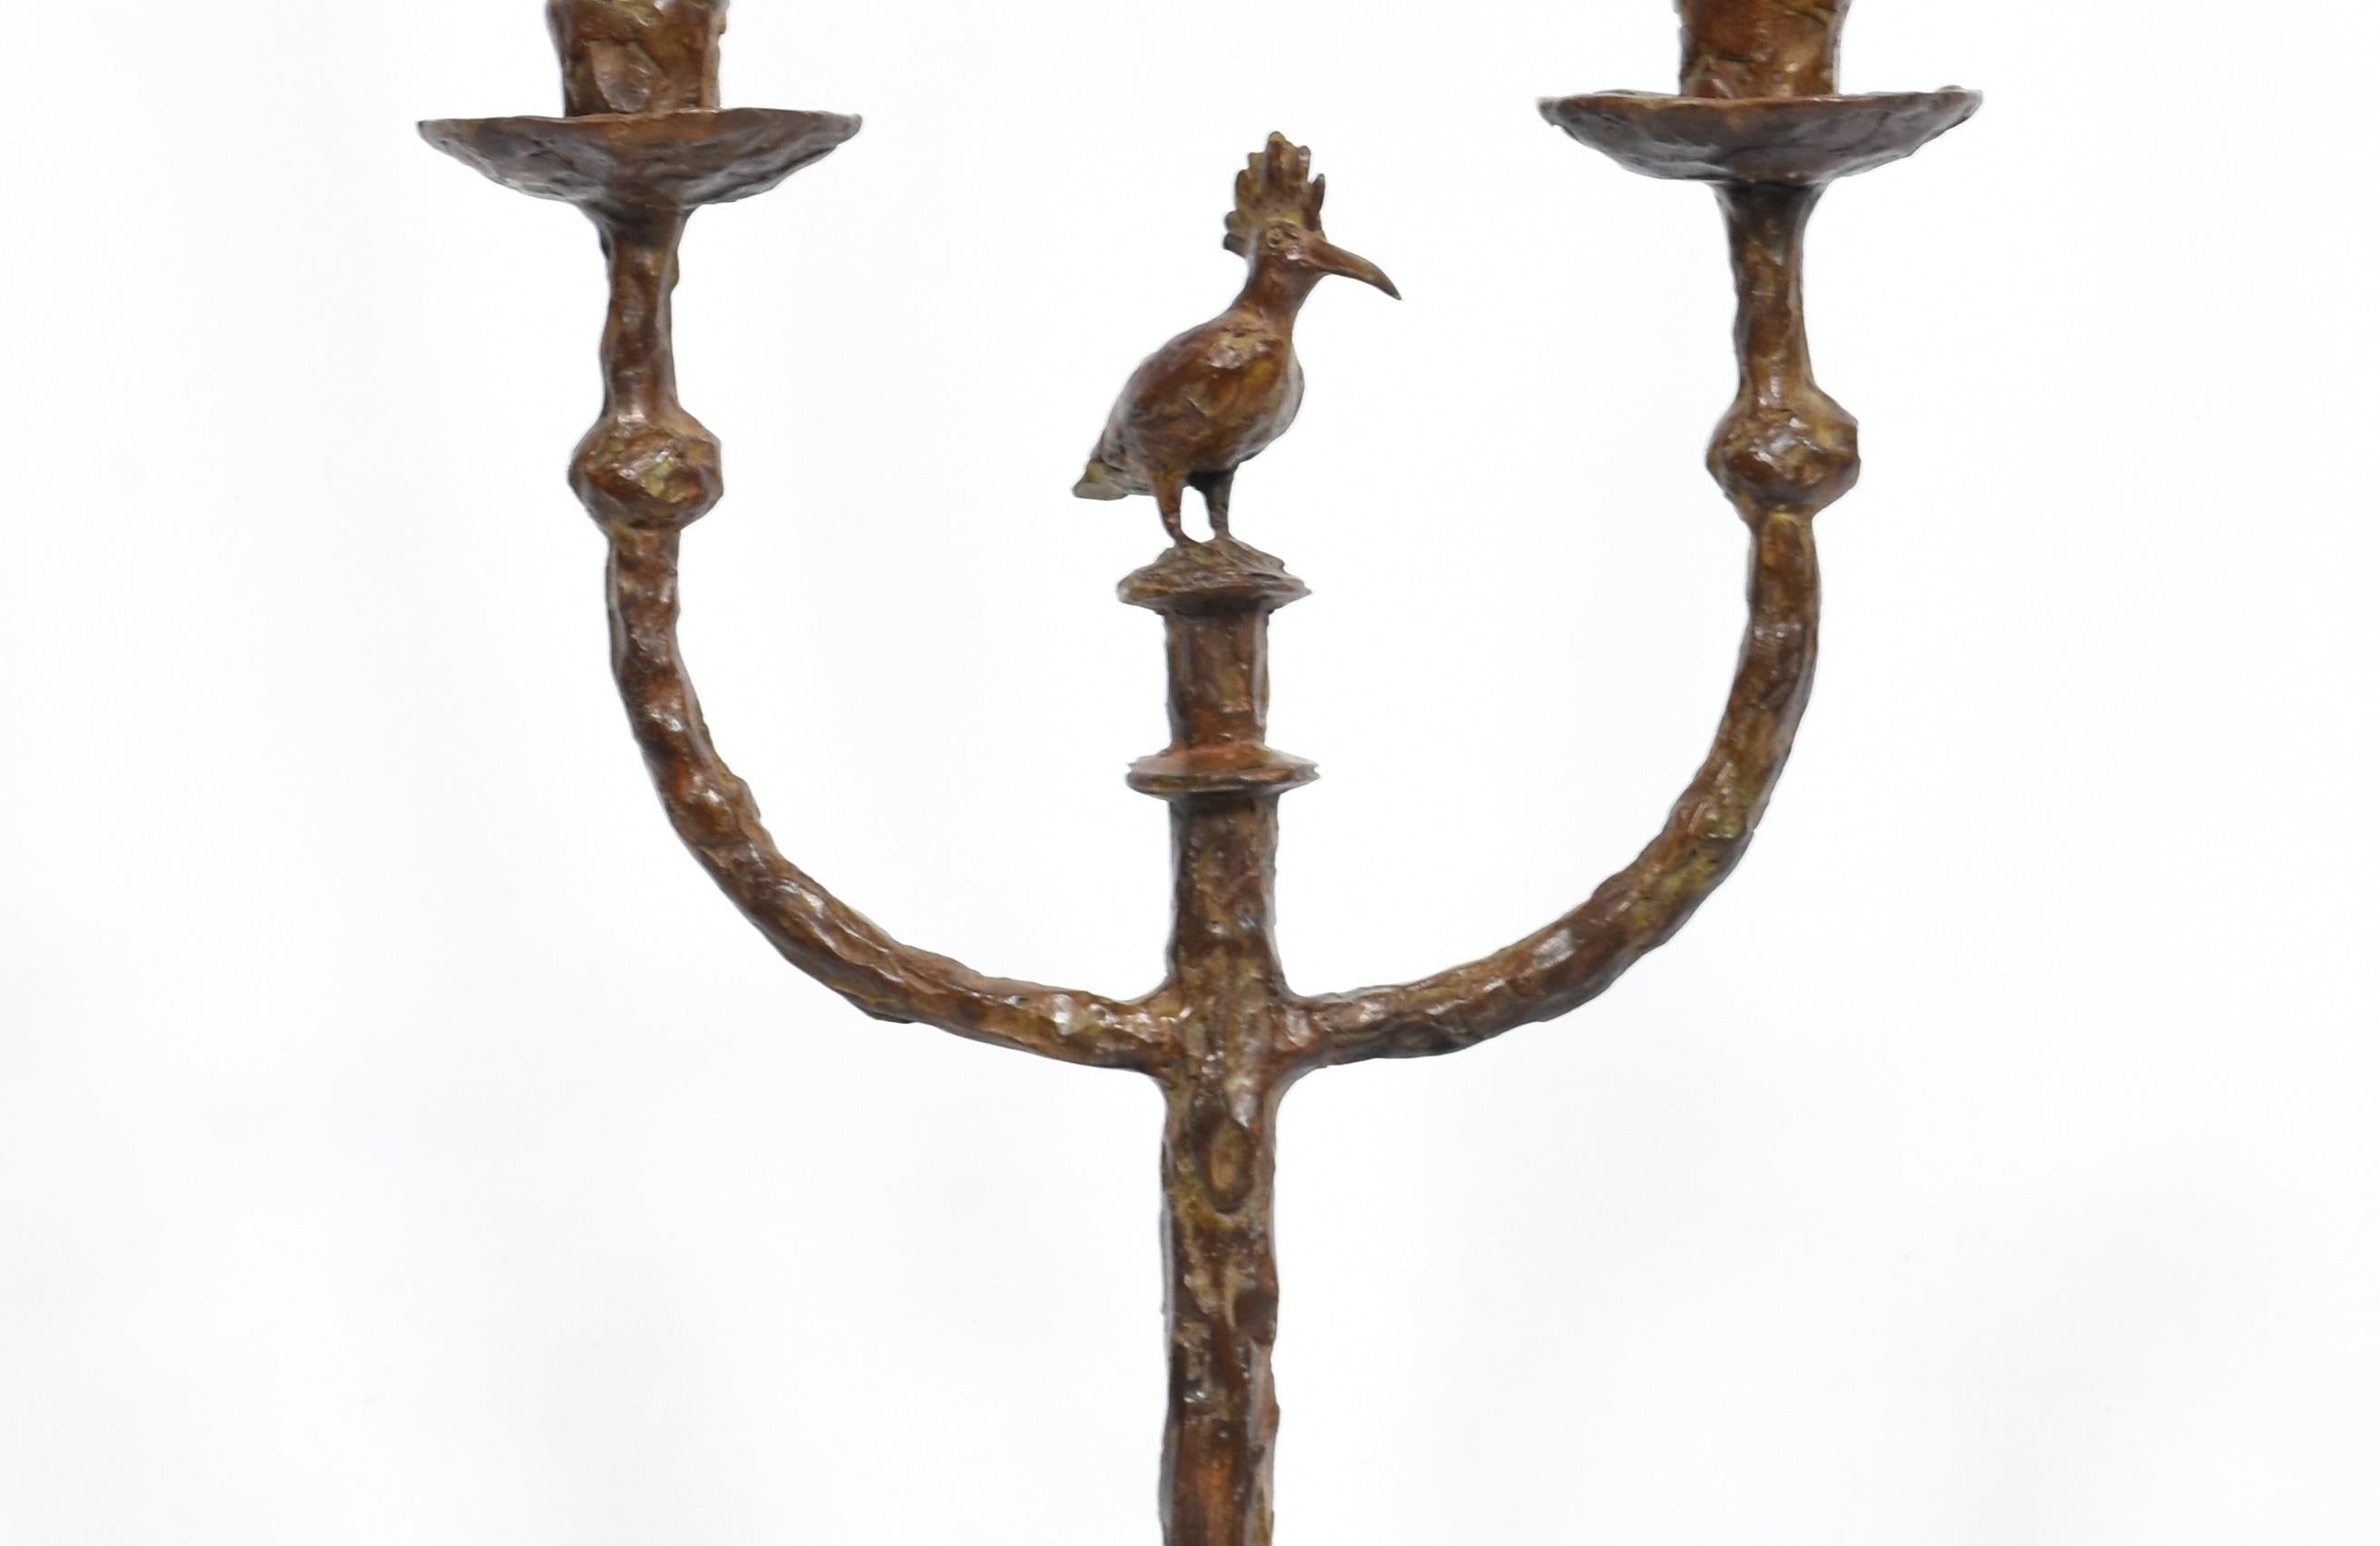 Rustic Hoopoe Candlestick in cast bronze featuring an African bird For Sale